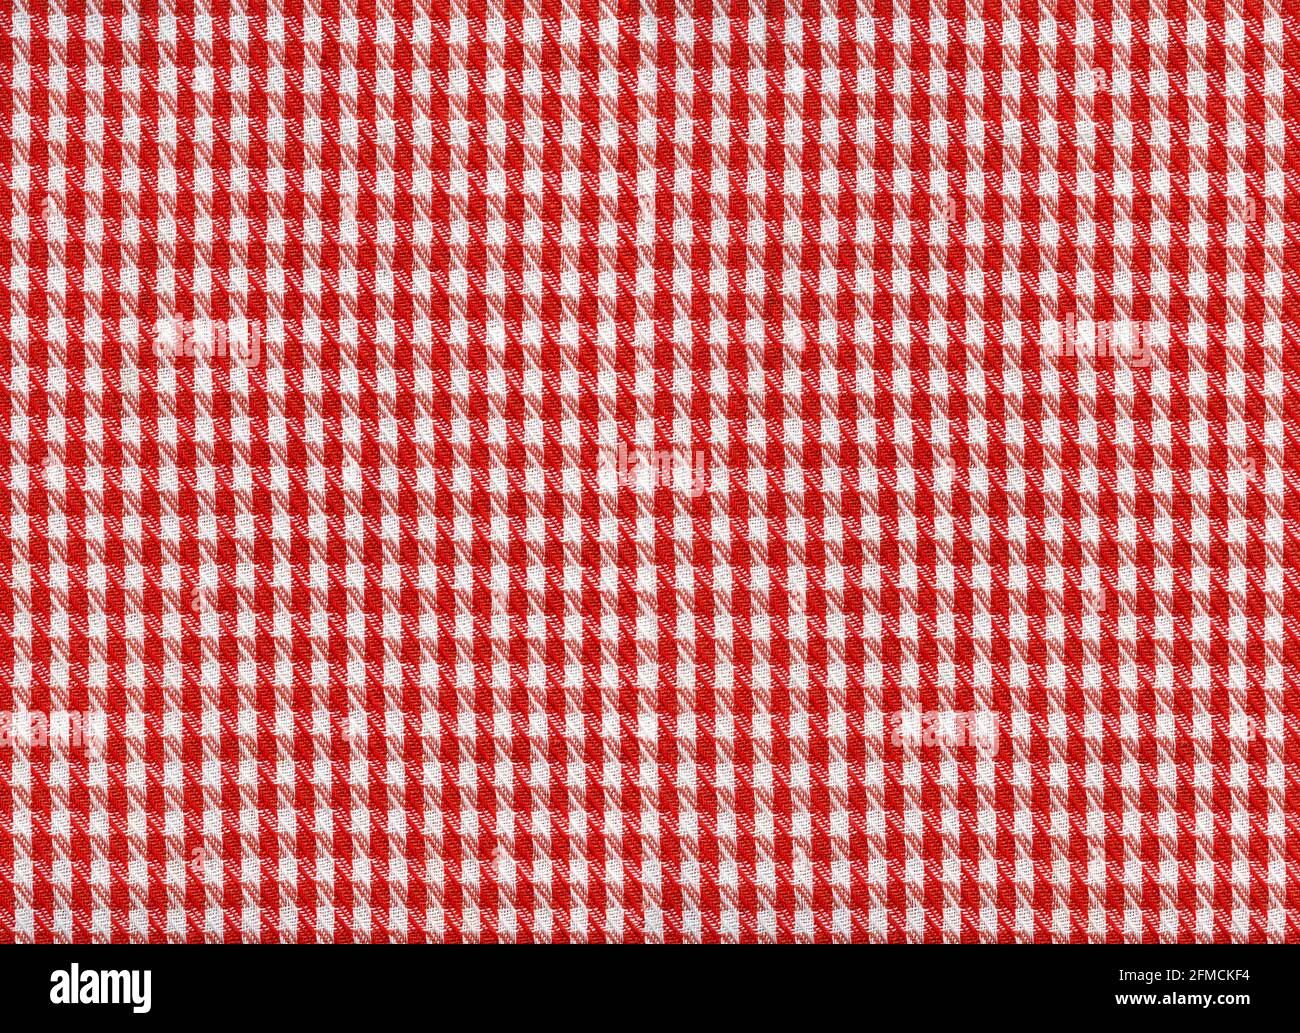 A flat area of woven fabric as a background texture and pattern red and white gingham Stock Photo